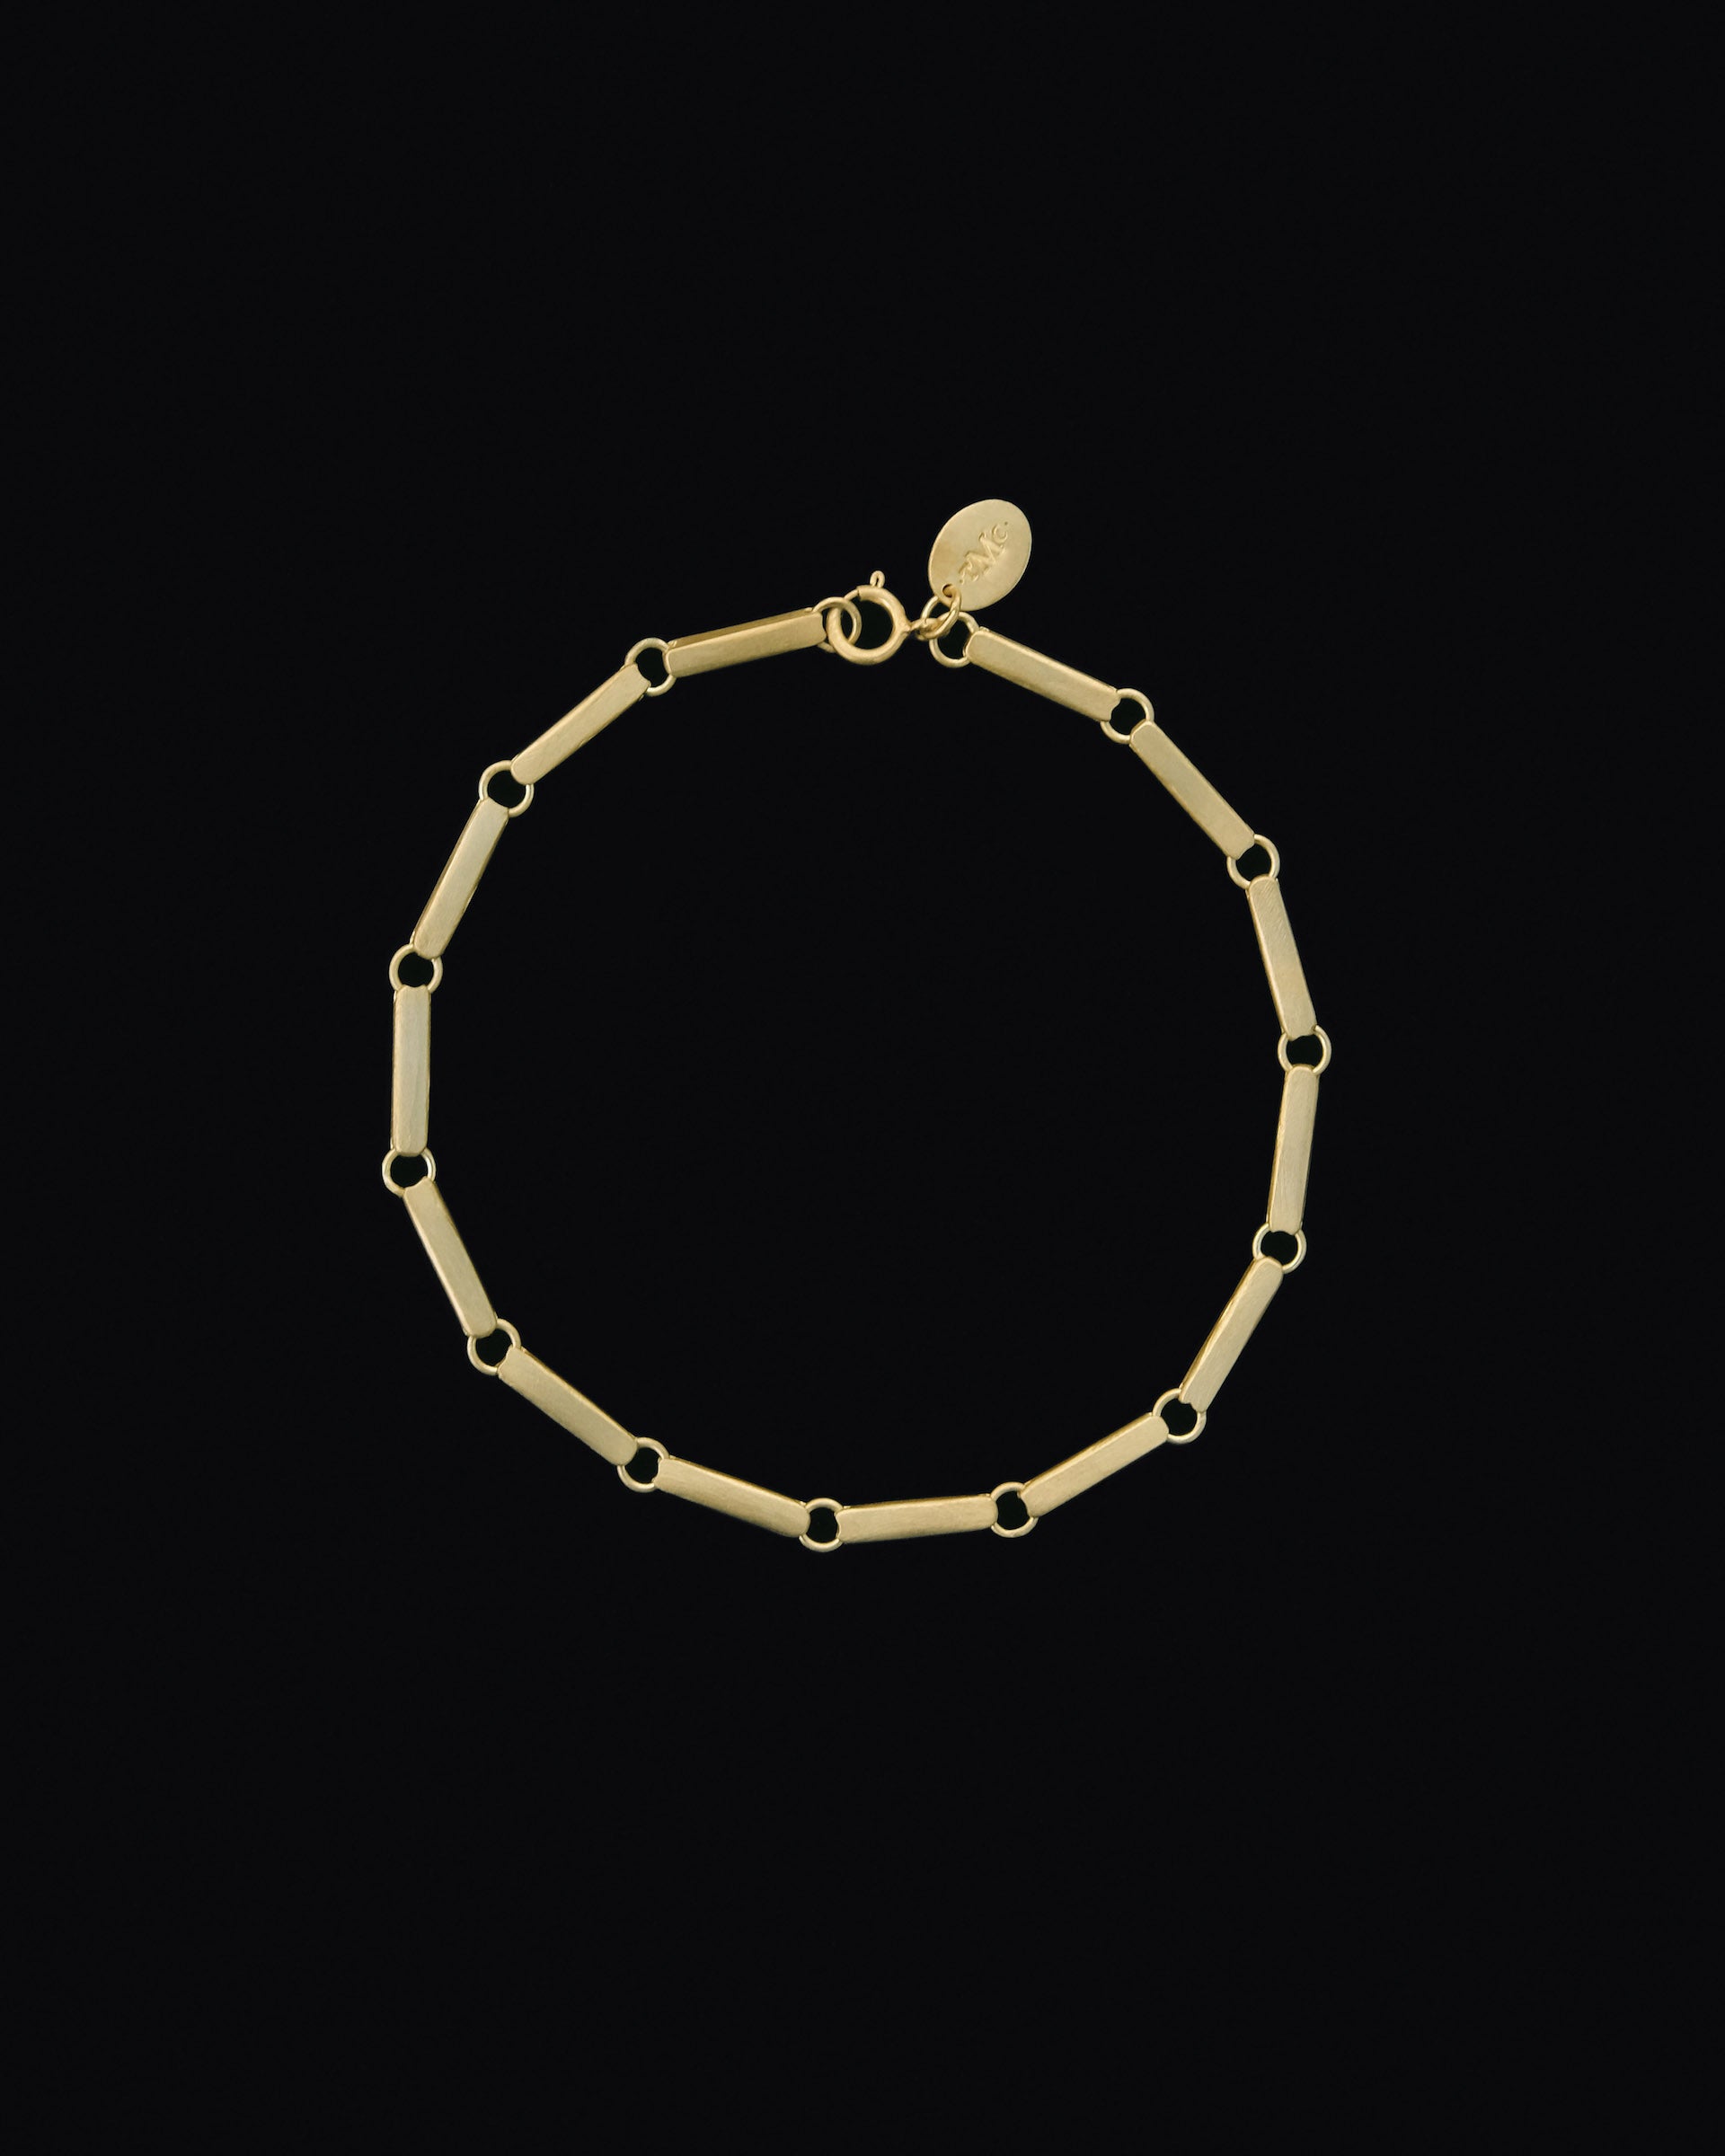 Tiana Marie Combes Estate Chain Bracelet in 14k Yellow Gold.